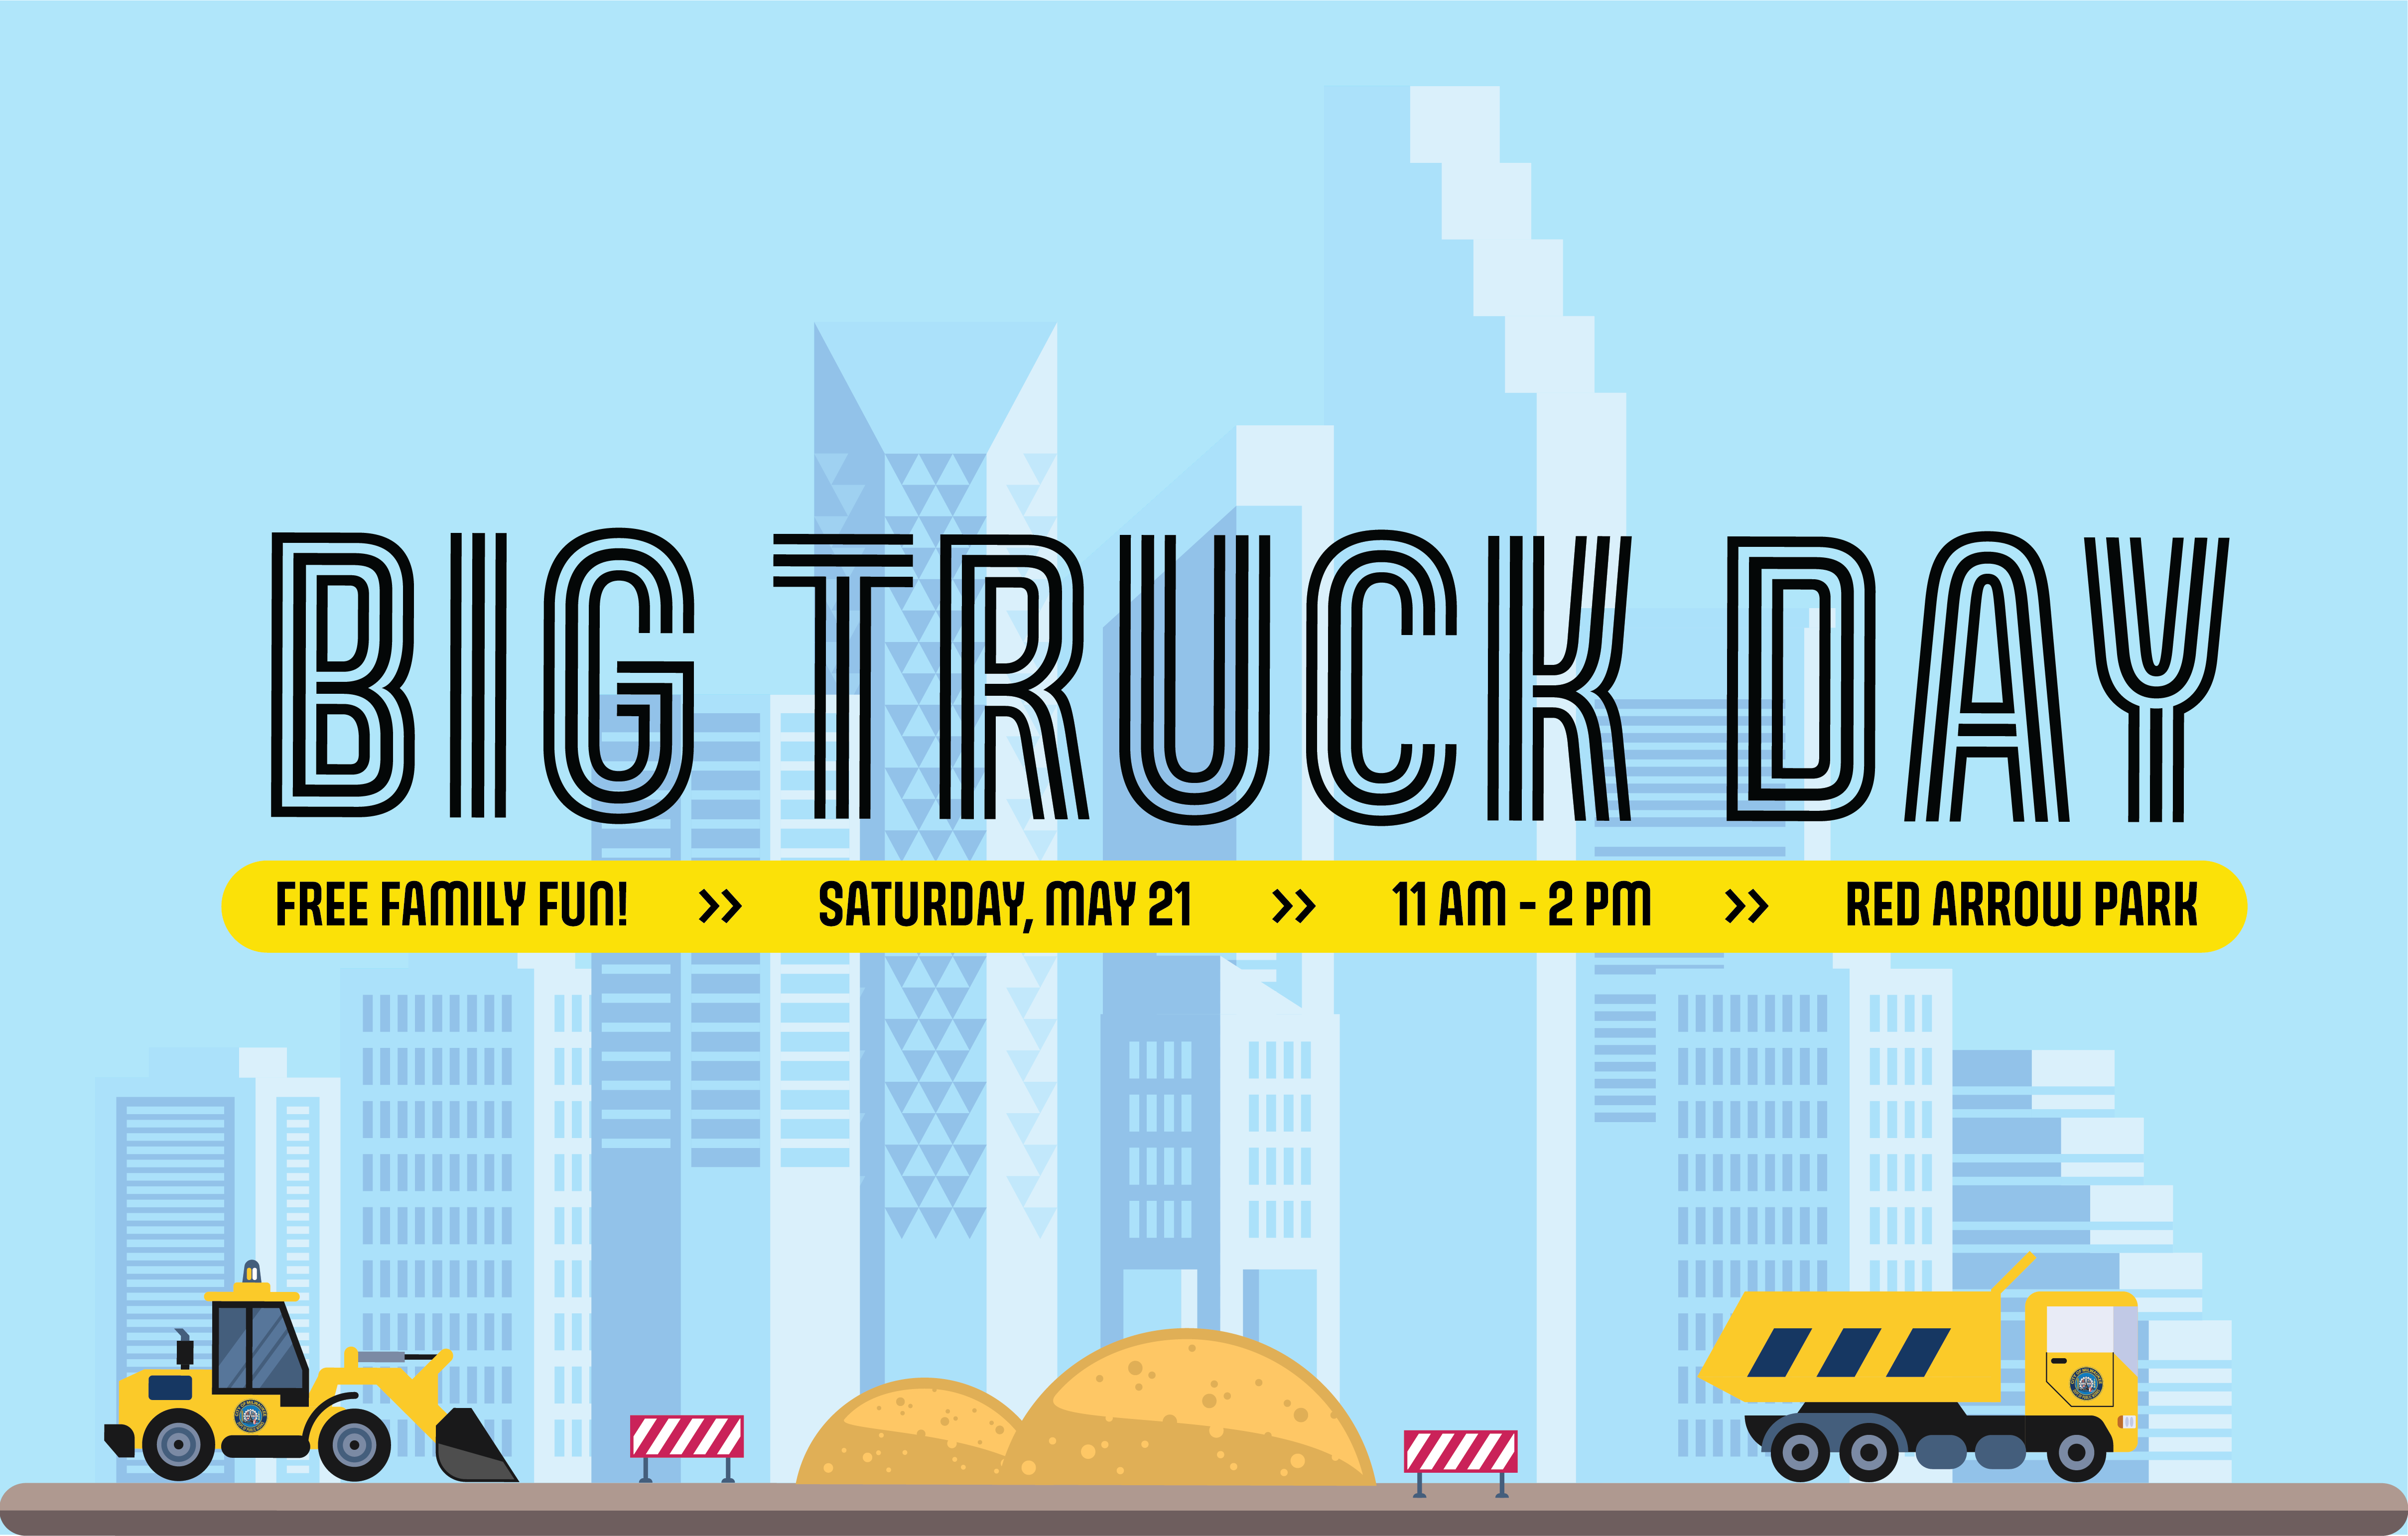 Get the Scoop on Big Truck Day, May 21 Blog Experience Milwaukee